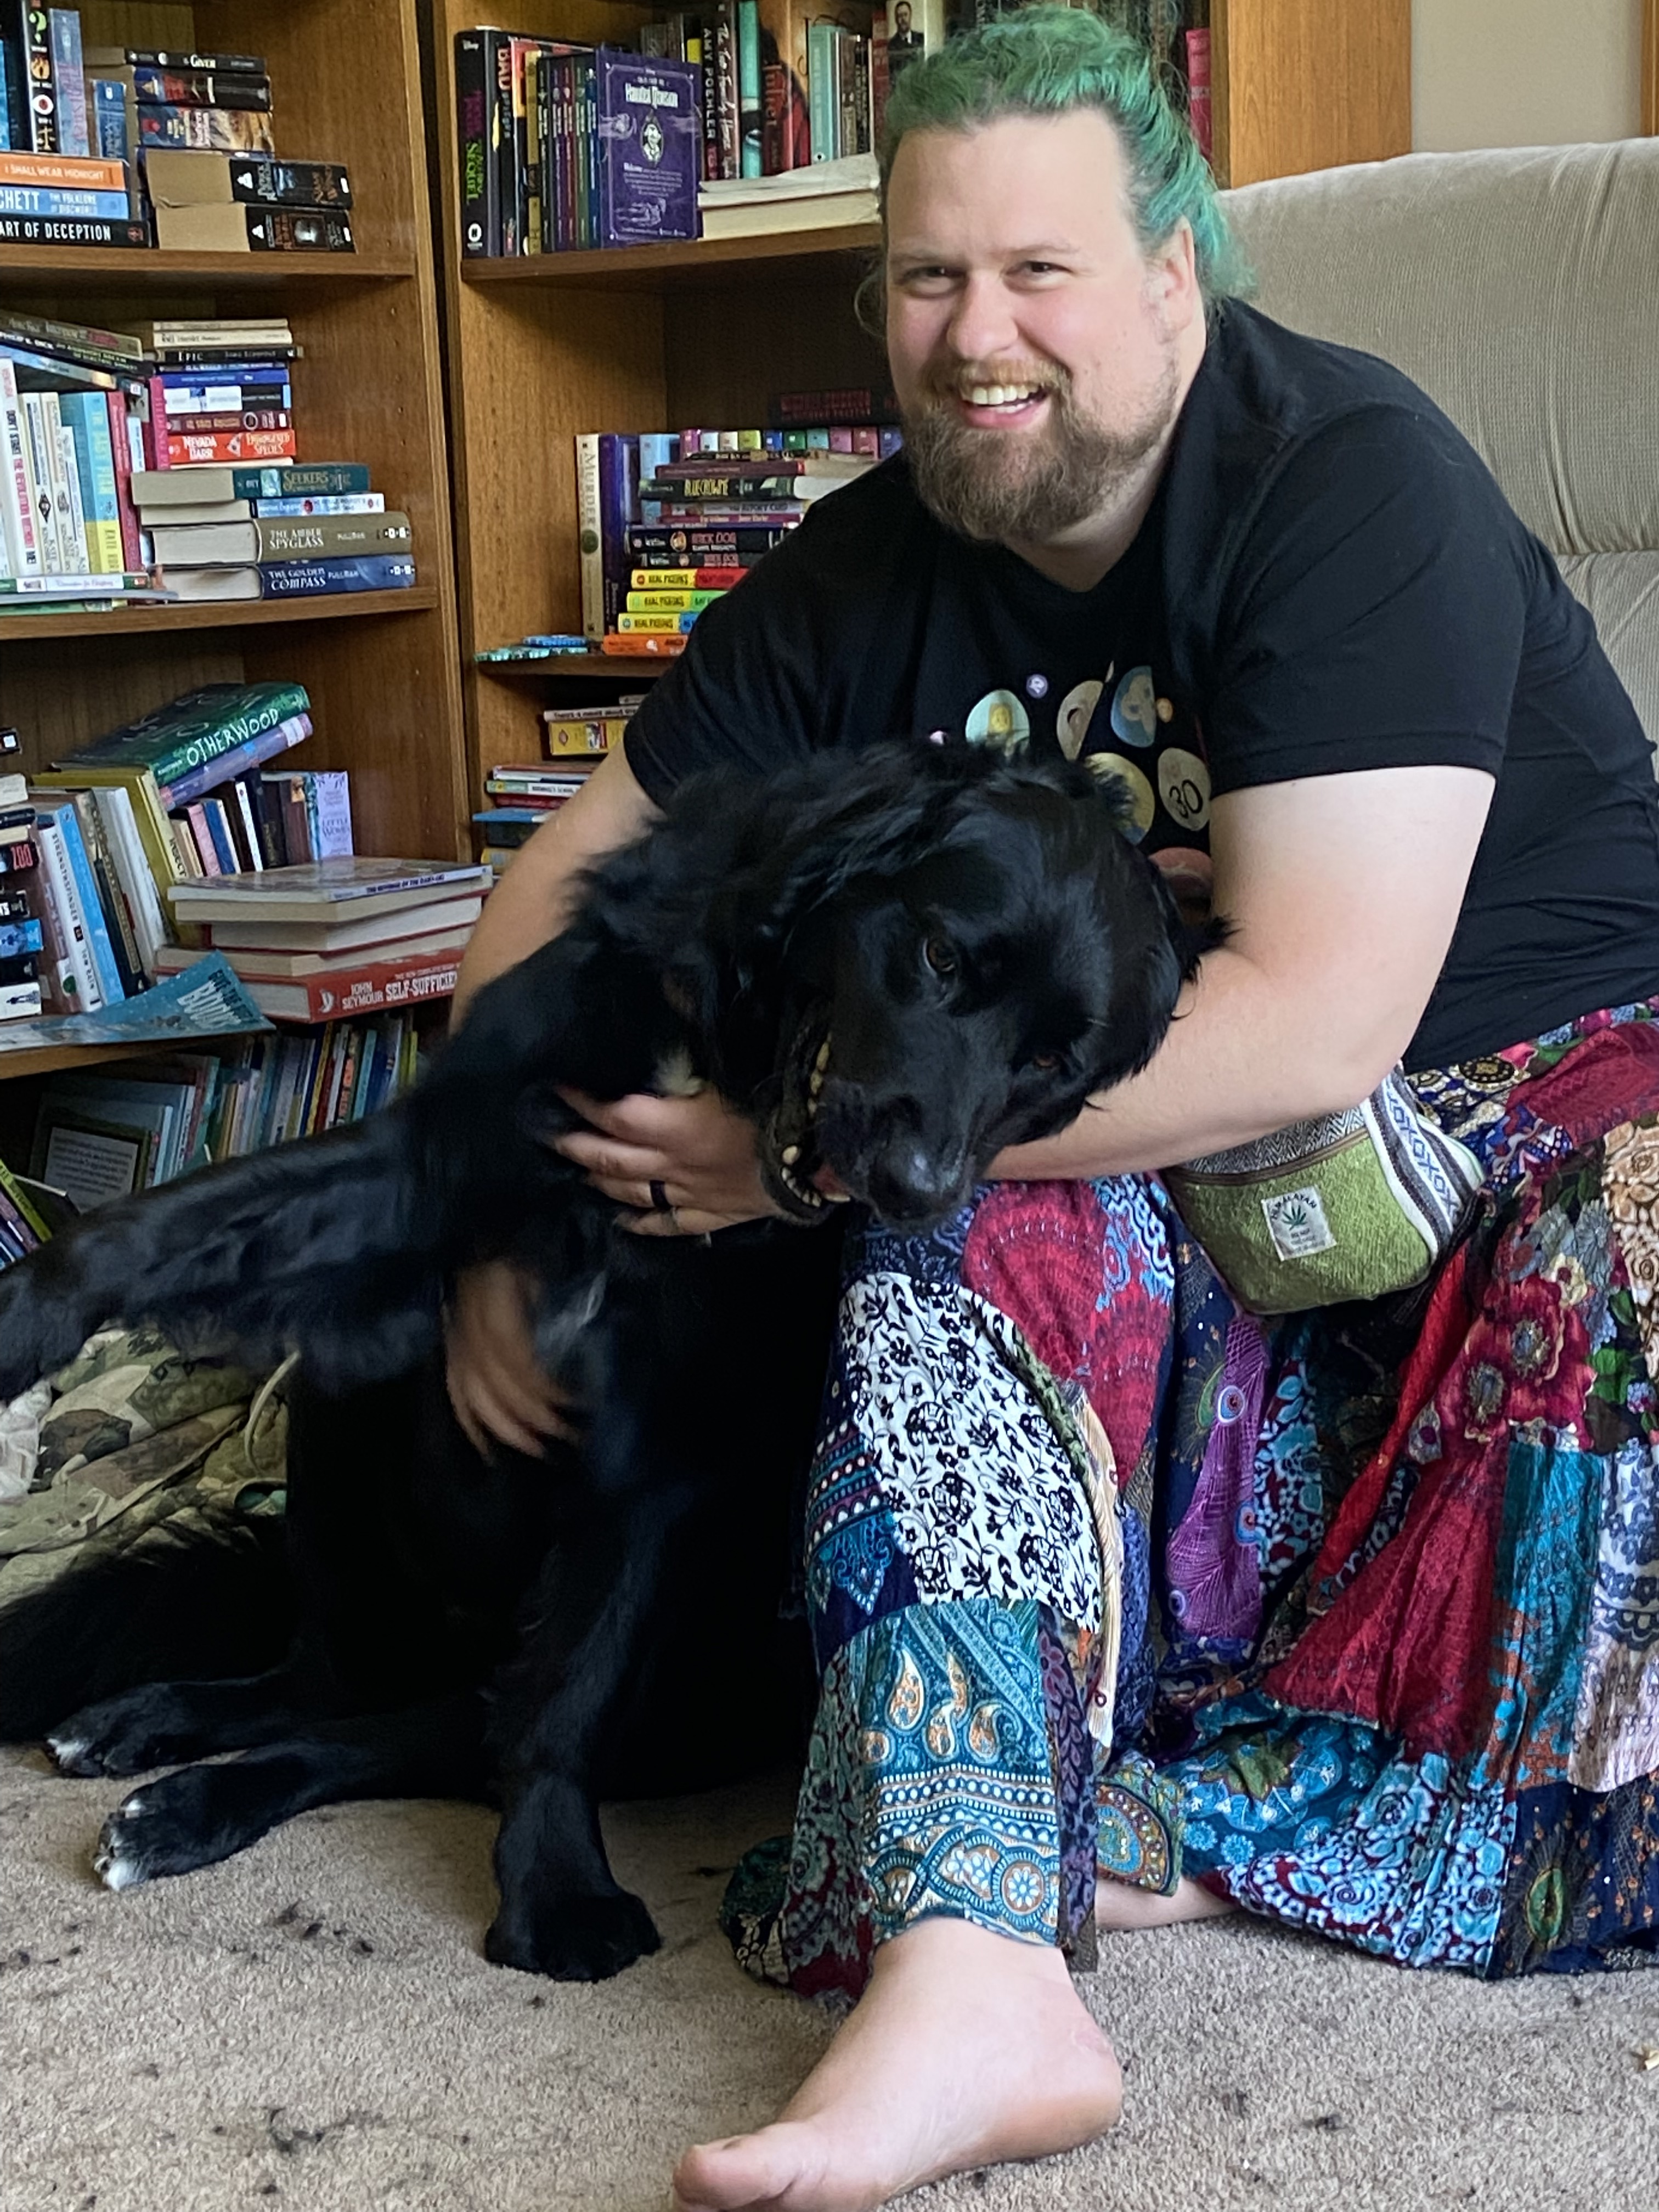 Photograph of Aaron with his dog